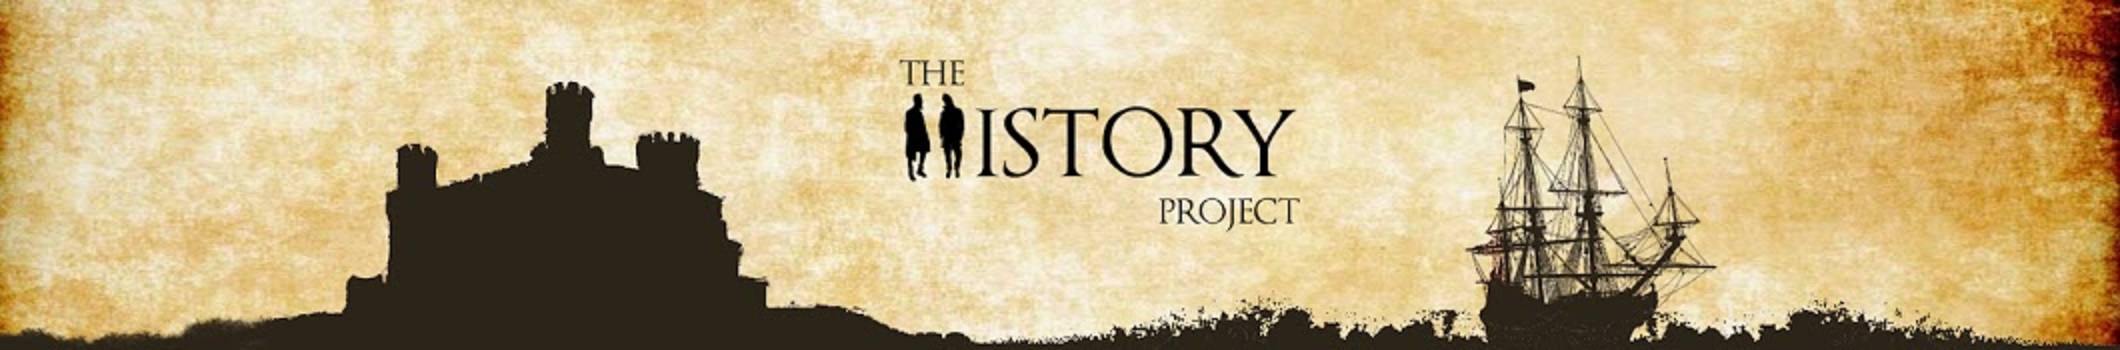 The Official History Project logo